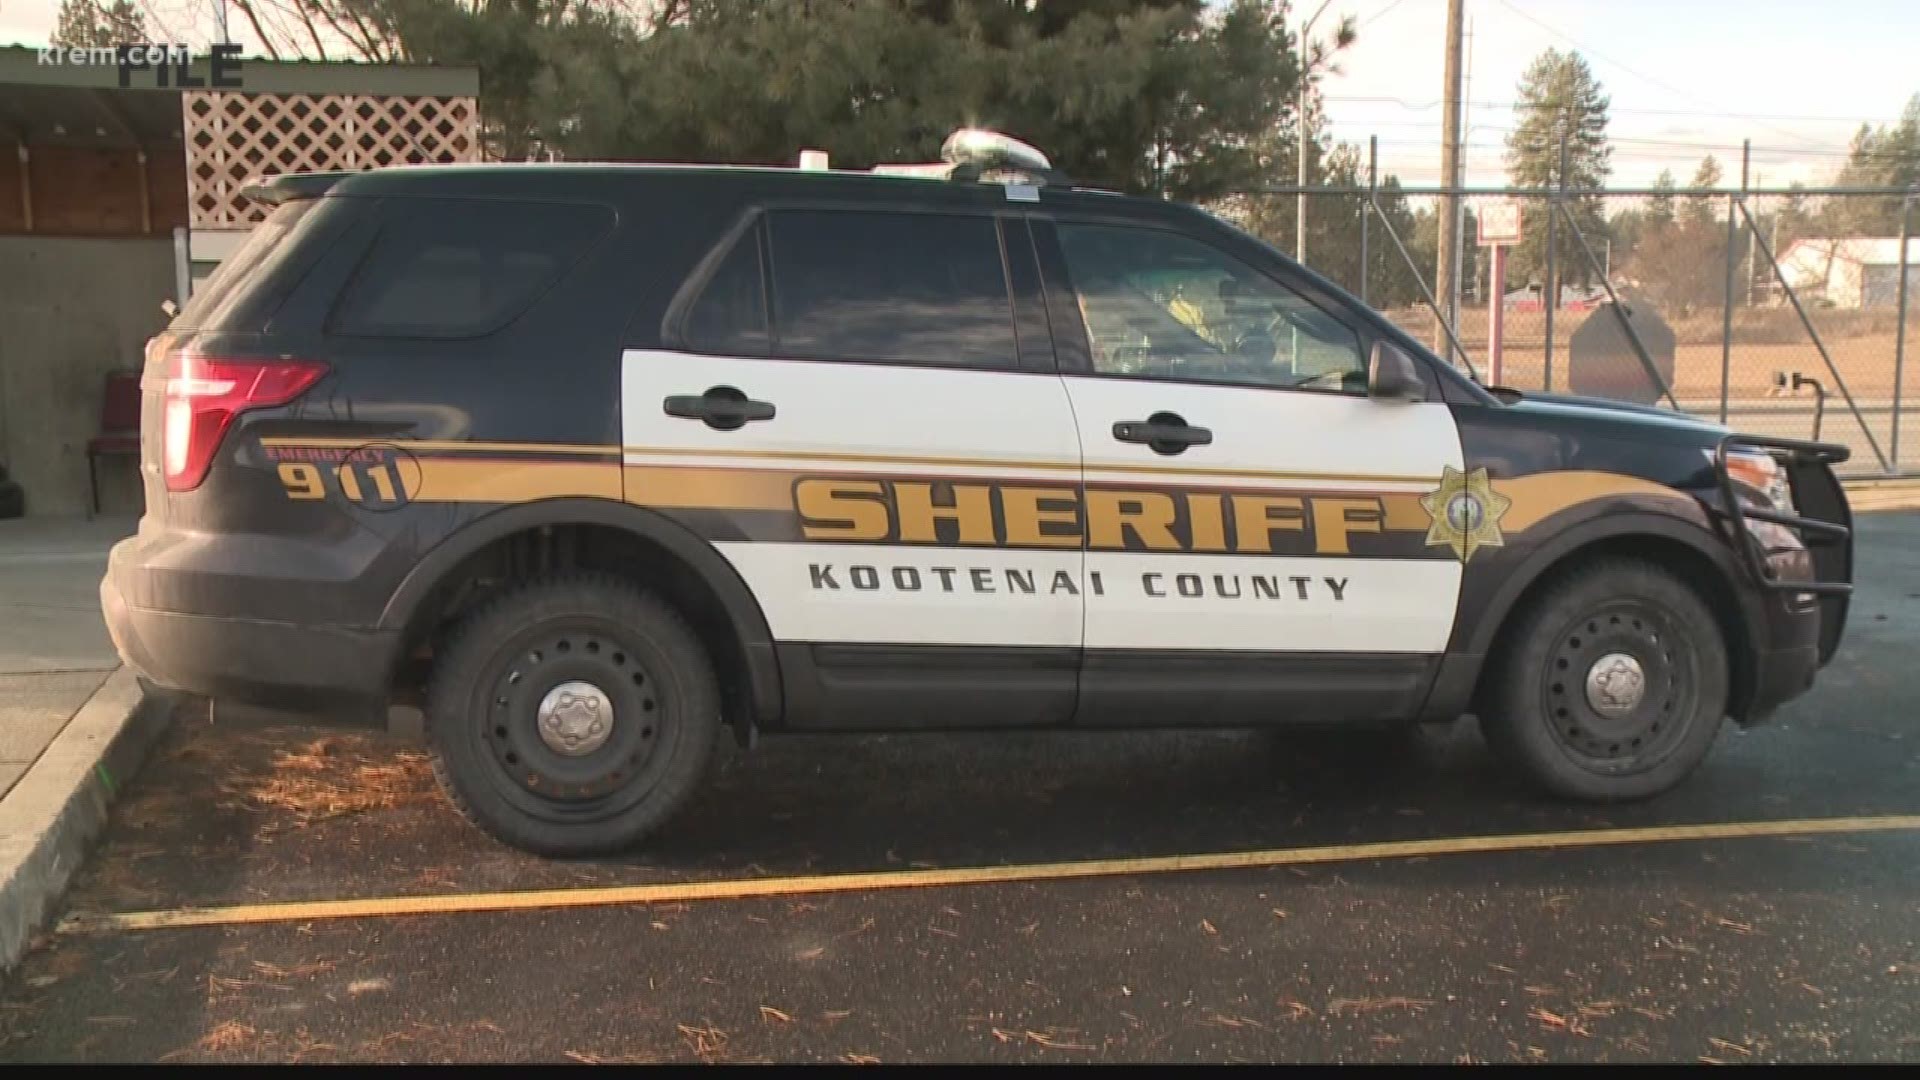 A pay gap is hitting staff at the jail in Kootenai County hard. Now, the sheriff is asking for a raise for his employees.